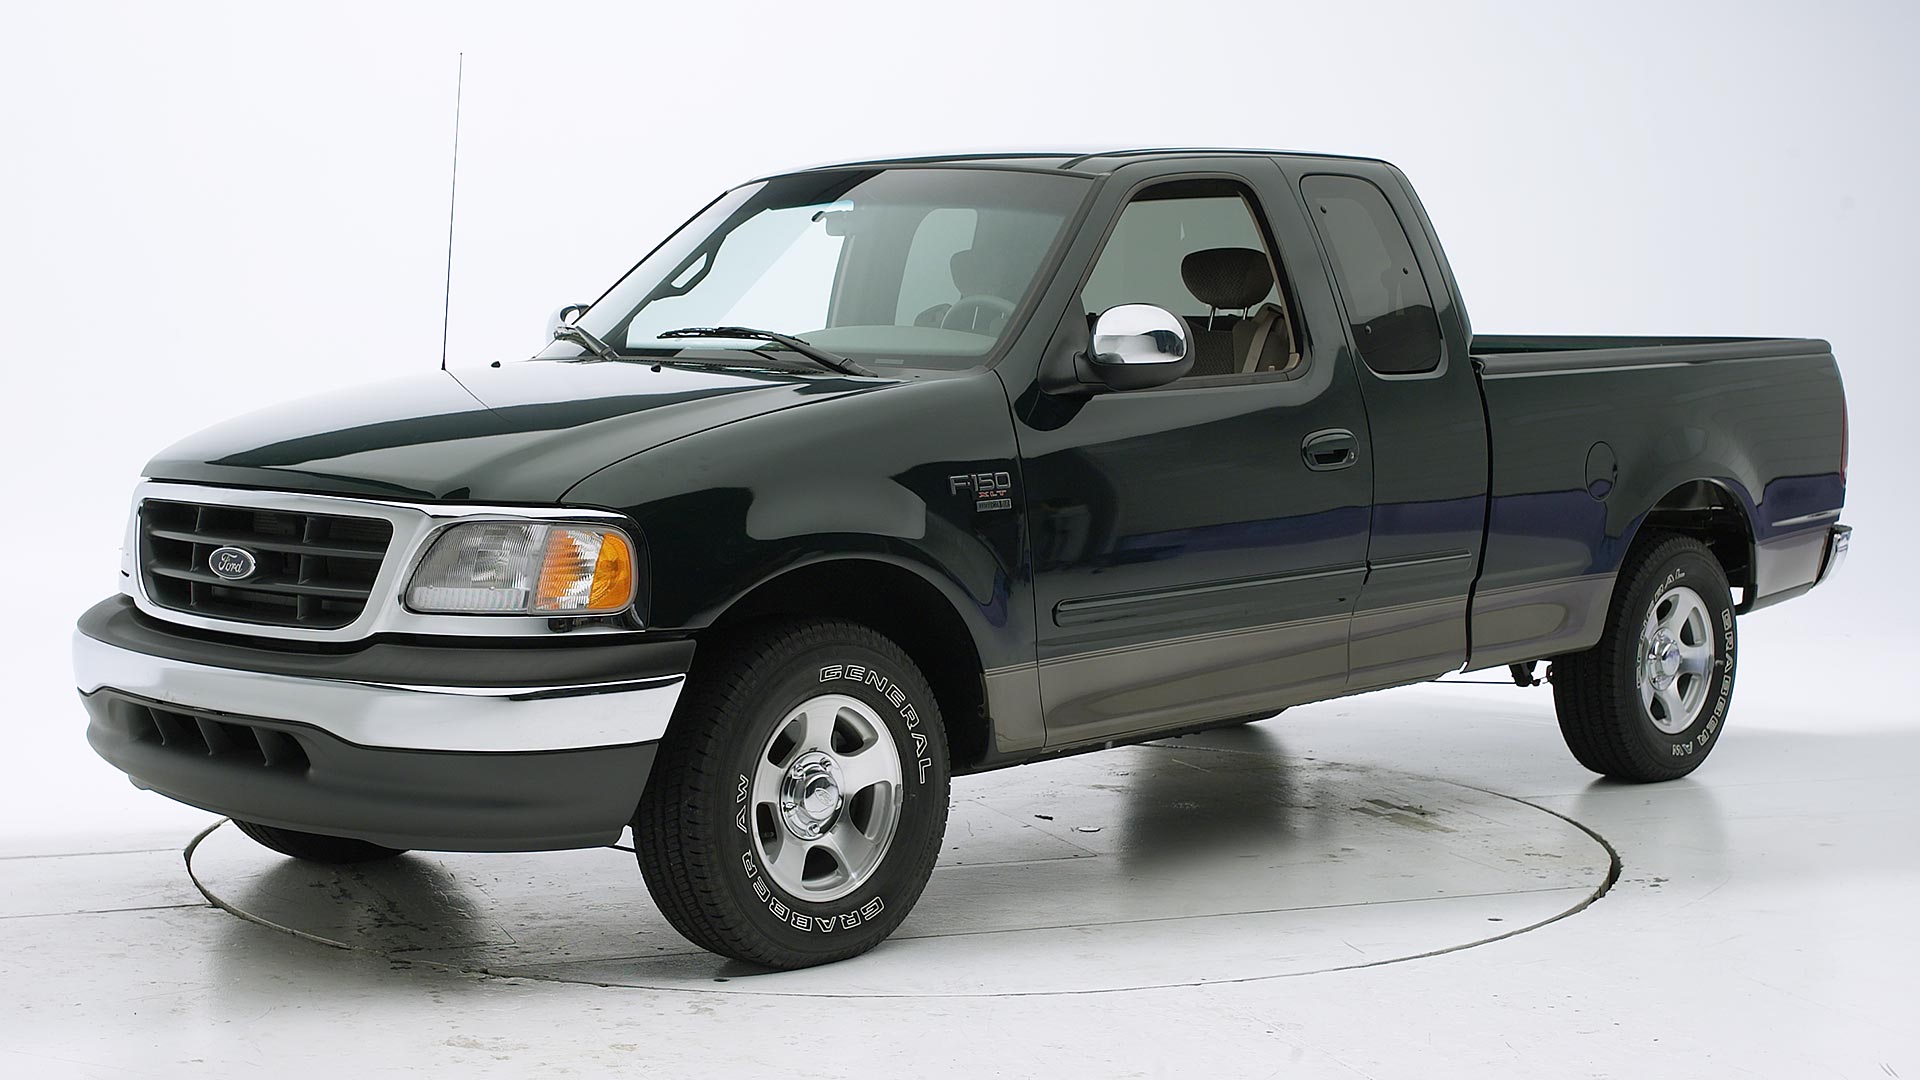 The Ford F-150: Model Years to Avoid (and to Buy) 2001 Ford F150 Triton V8 Towing Capacity